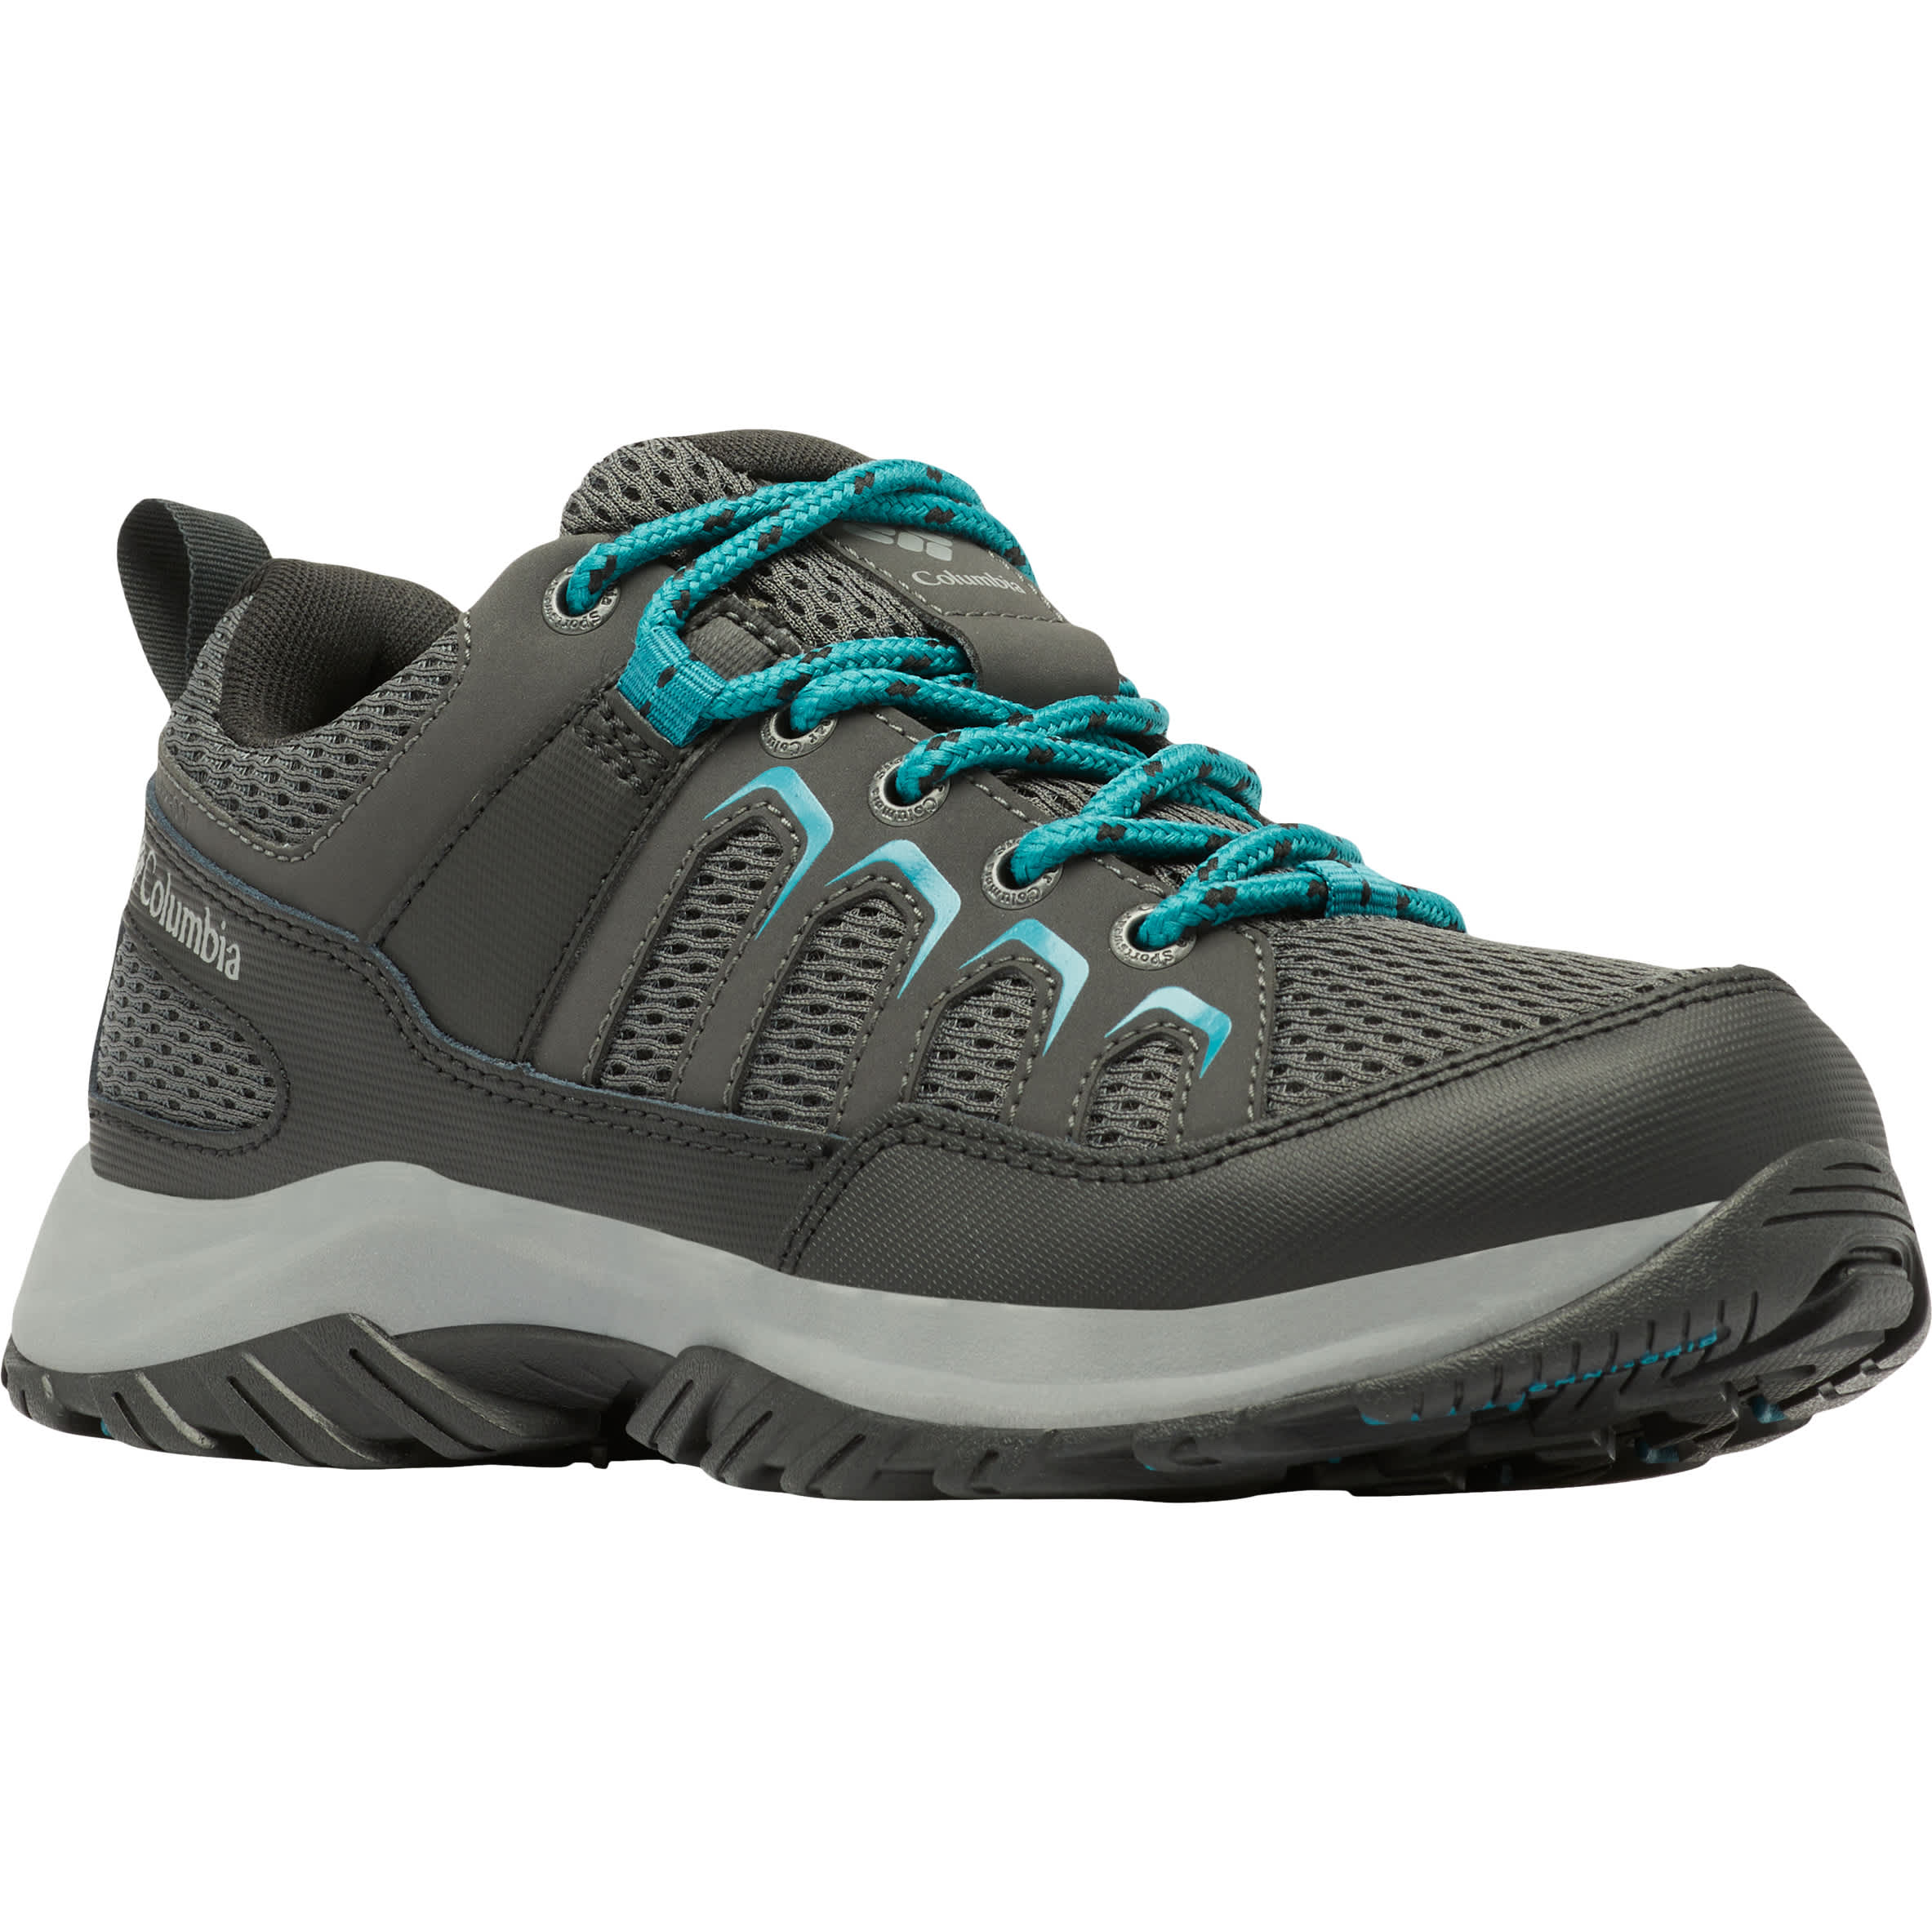 Under Armour Charged Bandit Trail 2 Shoe Review - FueledByLOLZ